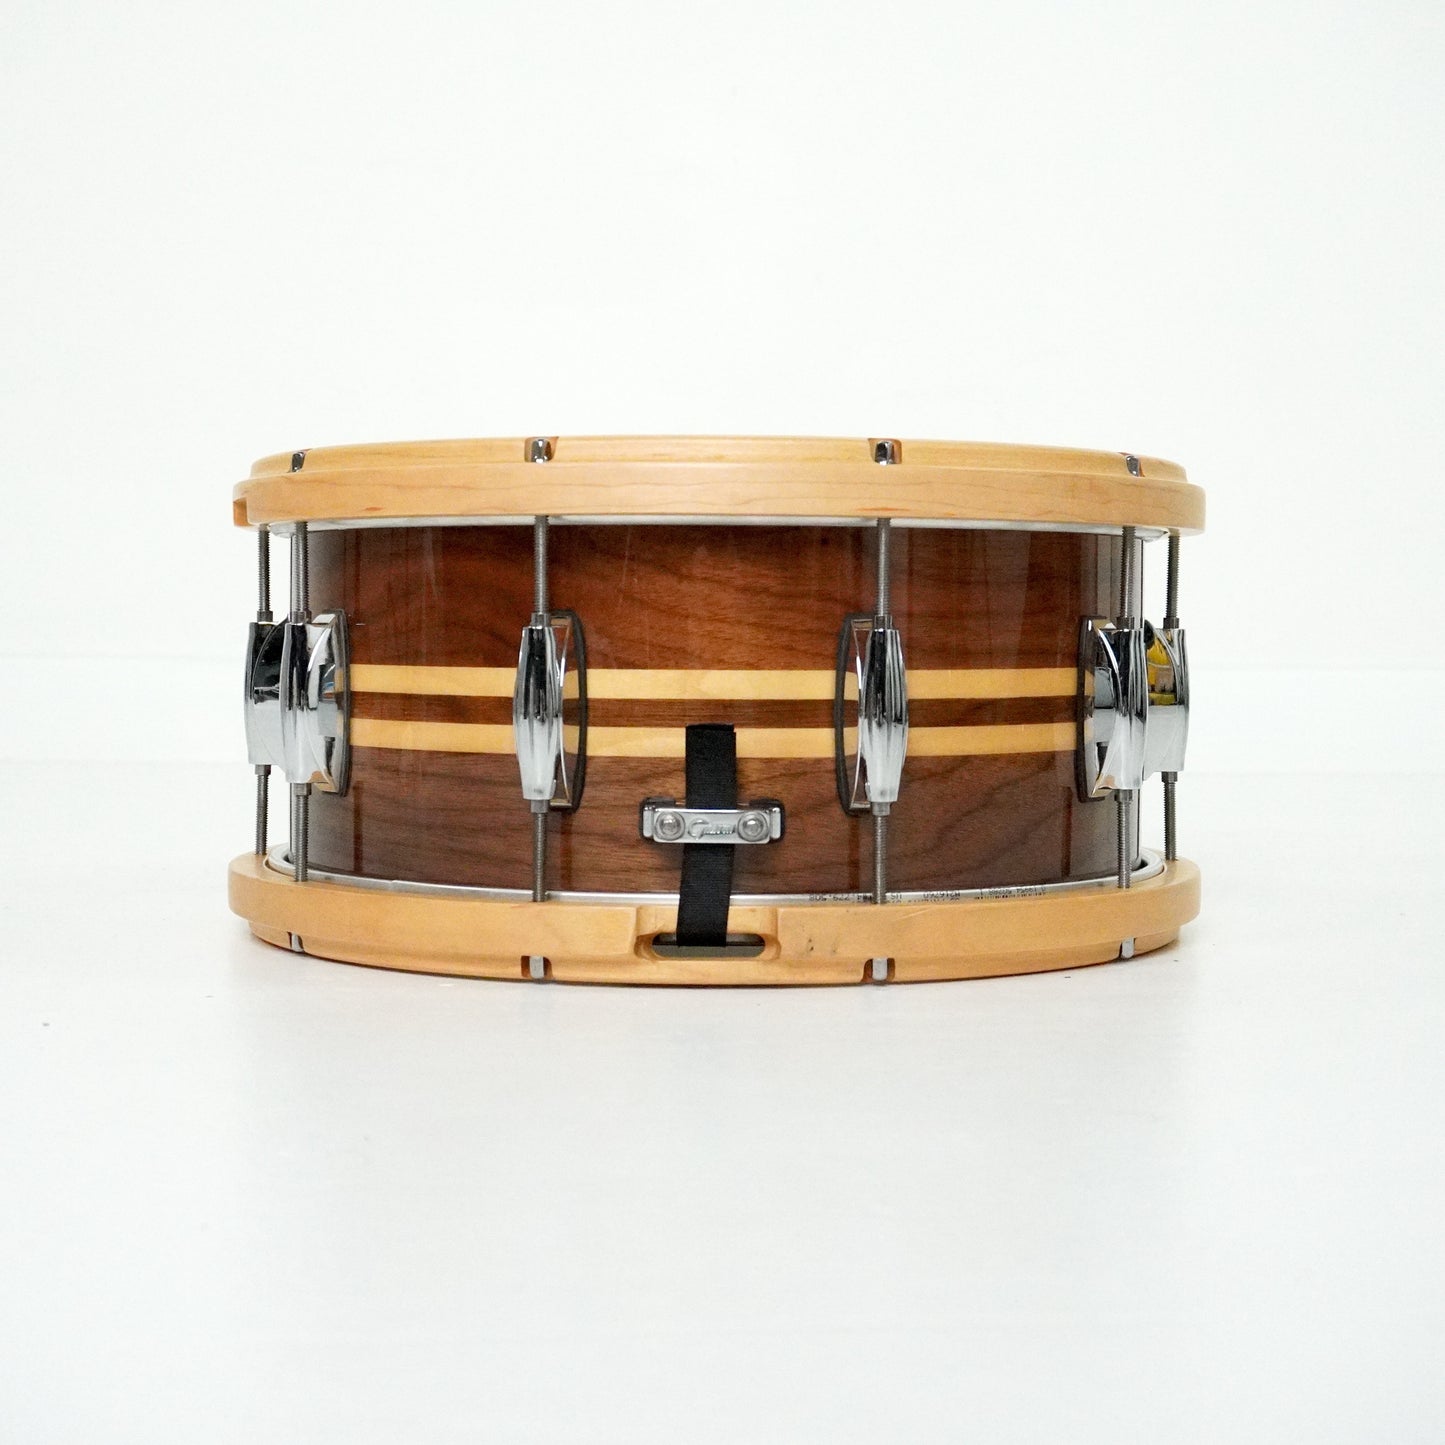 Gretsch 14" x 6.5” ‘Full Range' Walnut with Maple Inlay Snare Drum with Maple Hoops